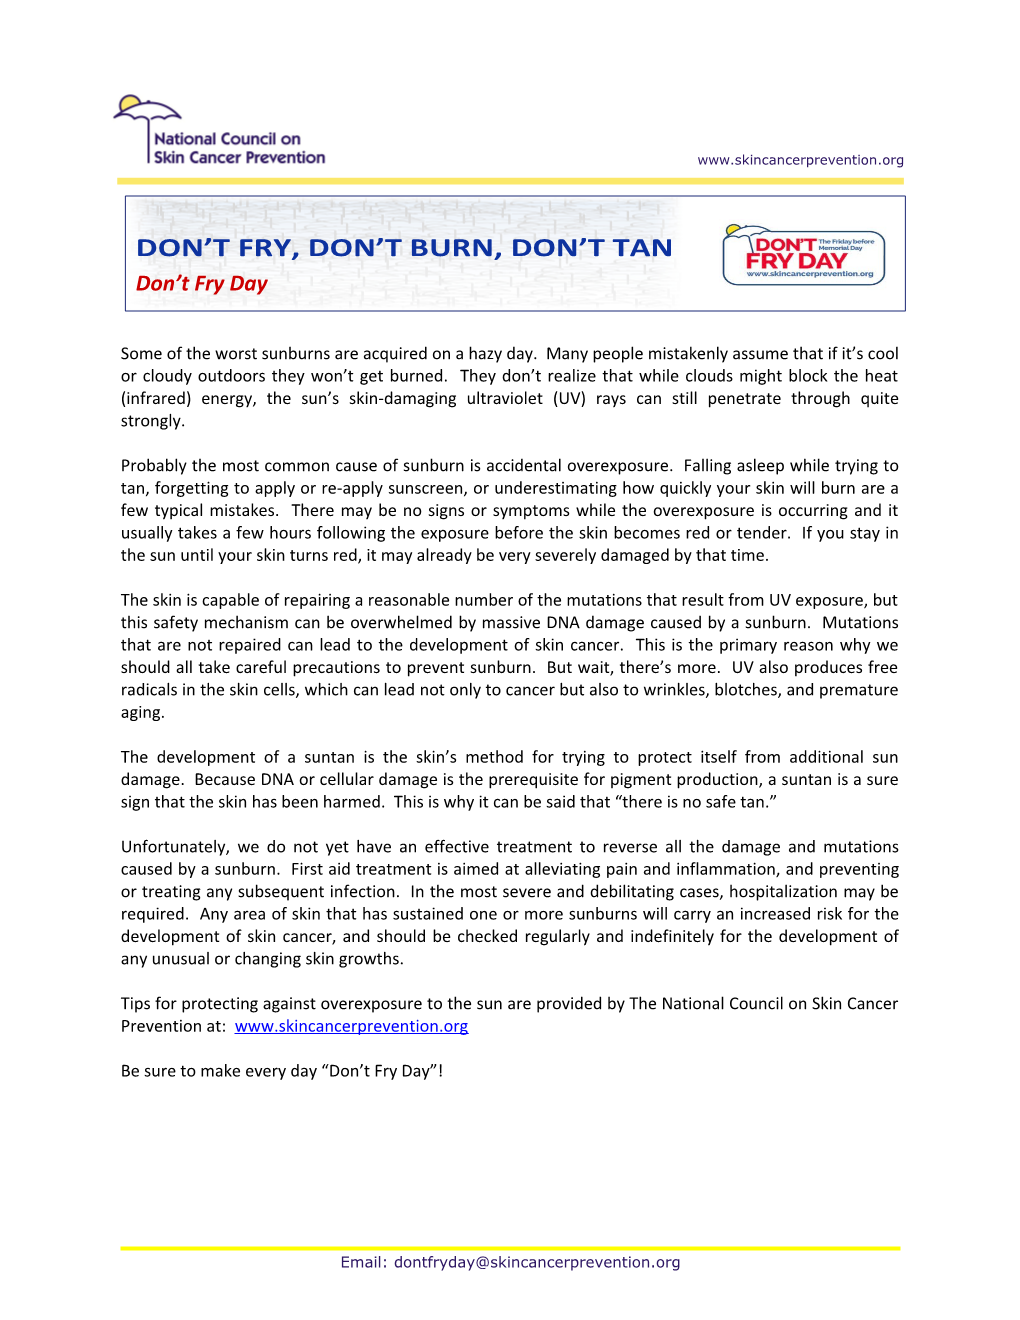 National Council on Skin Cancer Prevention